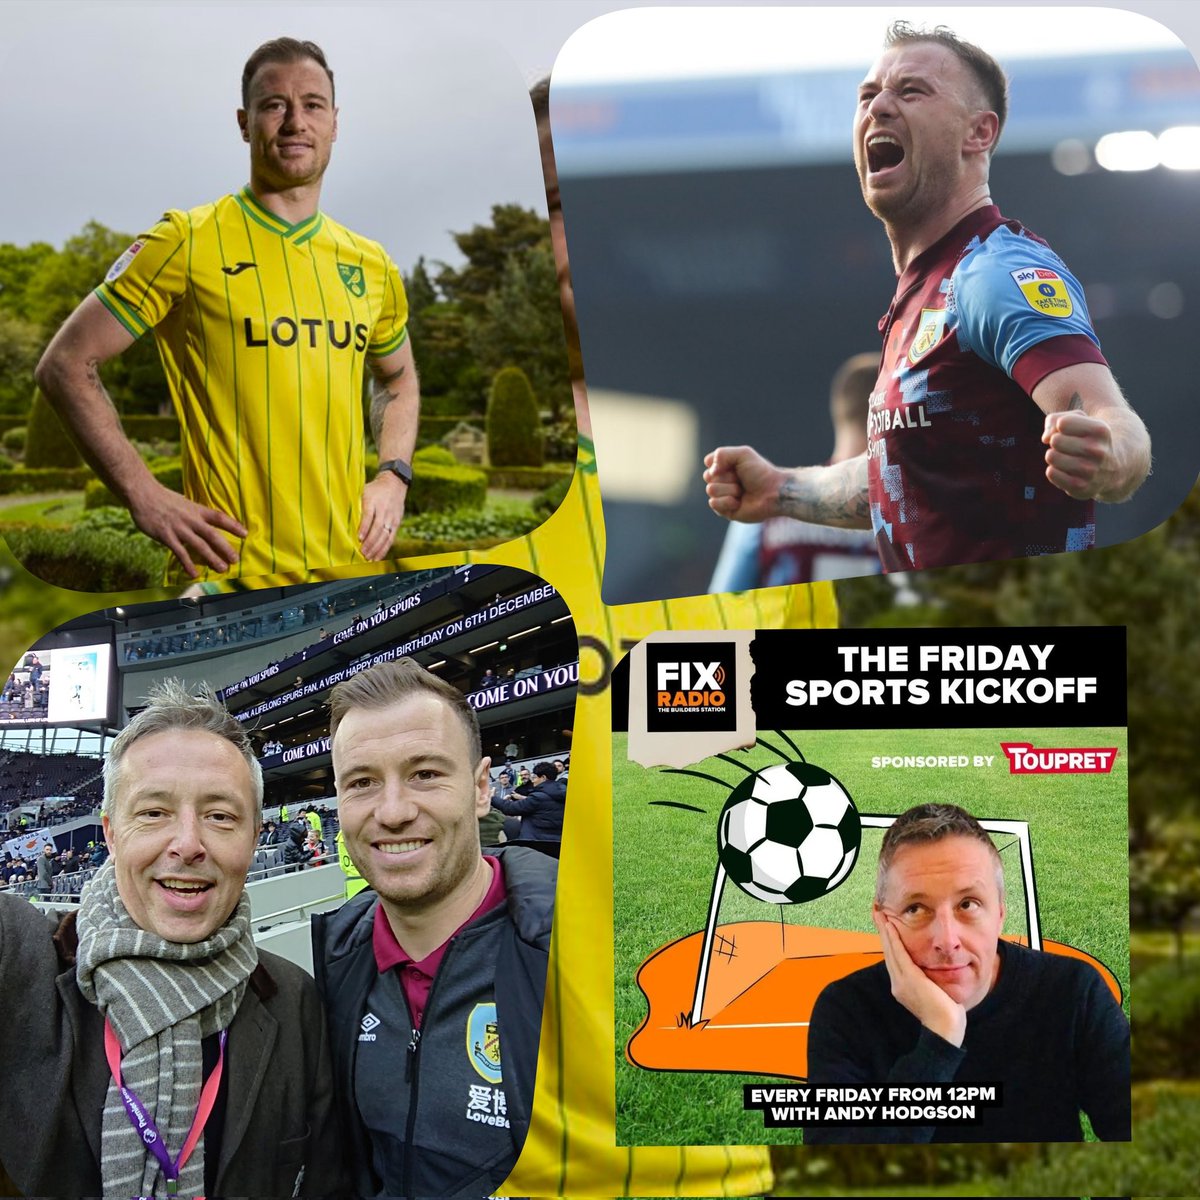 This Friday on my Friday Sports Kick off show.

Why did he think his career was over @BurnleyOfficial
Can he still play in the @premierleague?
How will he fly @NorwichCityFC

Exclusive interview

Across the UK on DAB radio @FixRadioUK
Fri 12-3pm

#twitterclarets #norwichcity